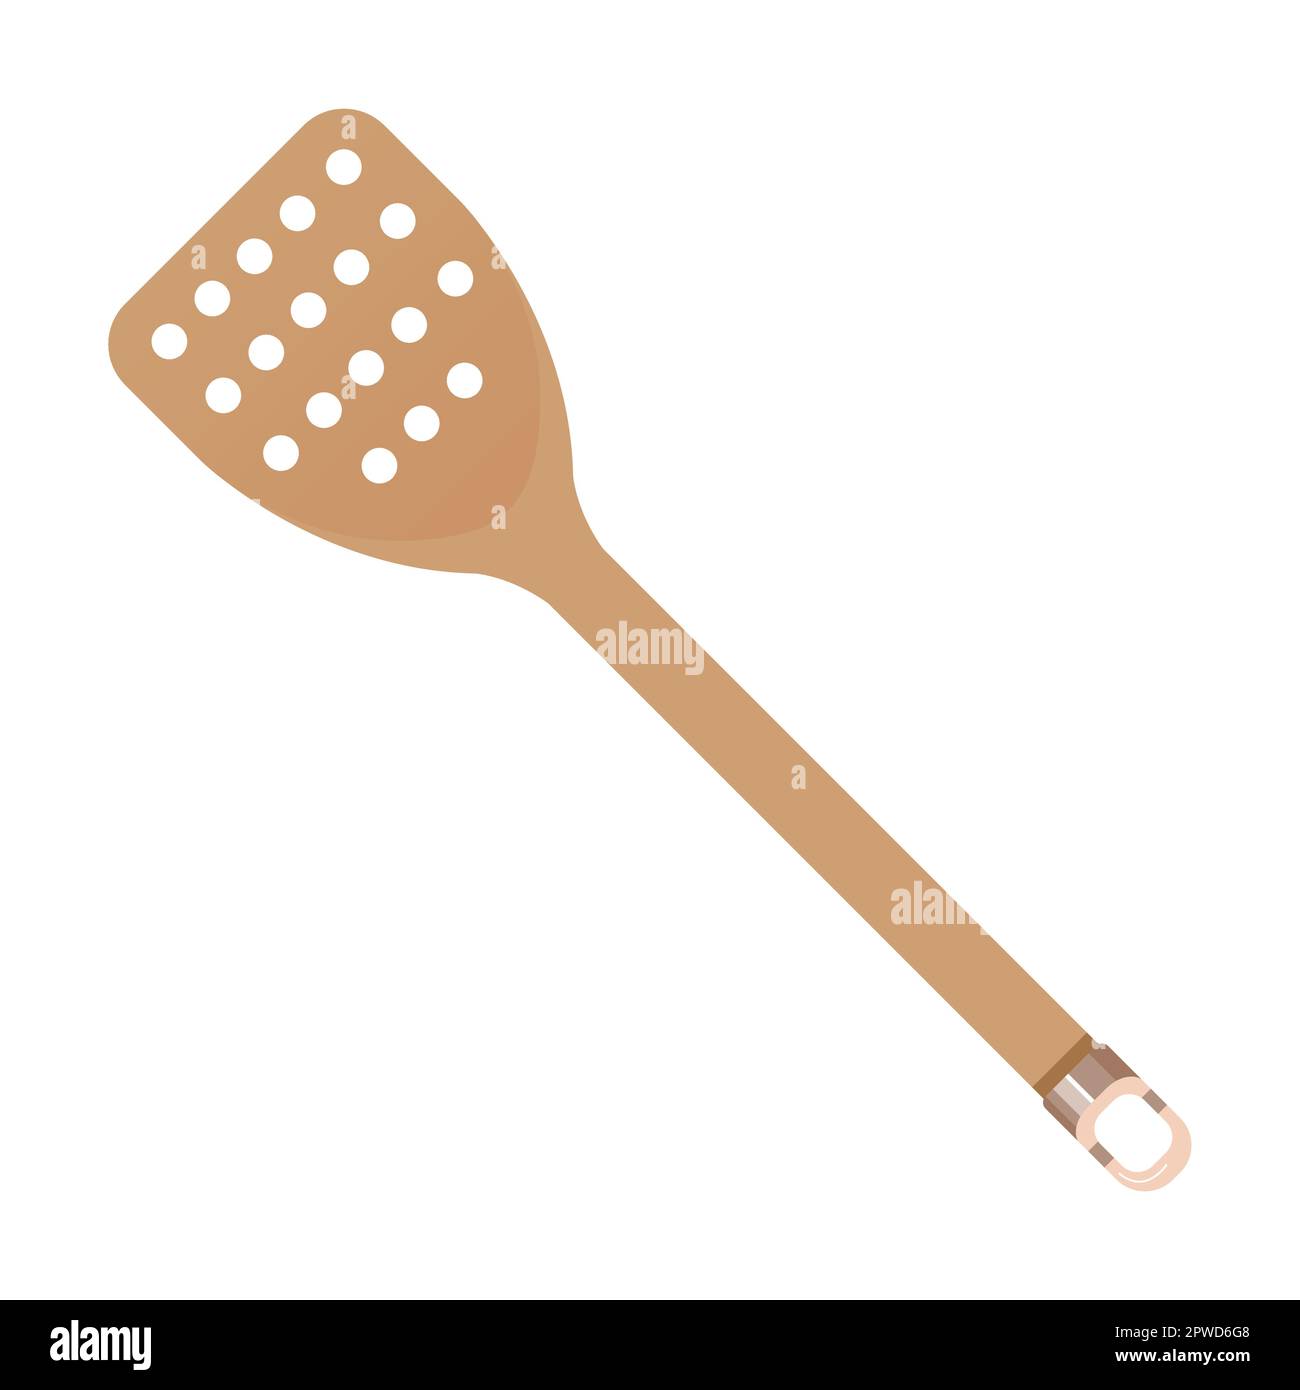 Kitchen utensil and tool, spoon with holes. Vector illustration of accessory for cooking, frying or eating food. Cartoon isolated on white Stock Vector